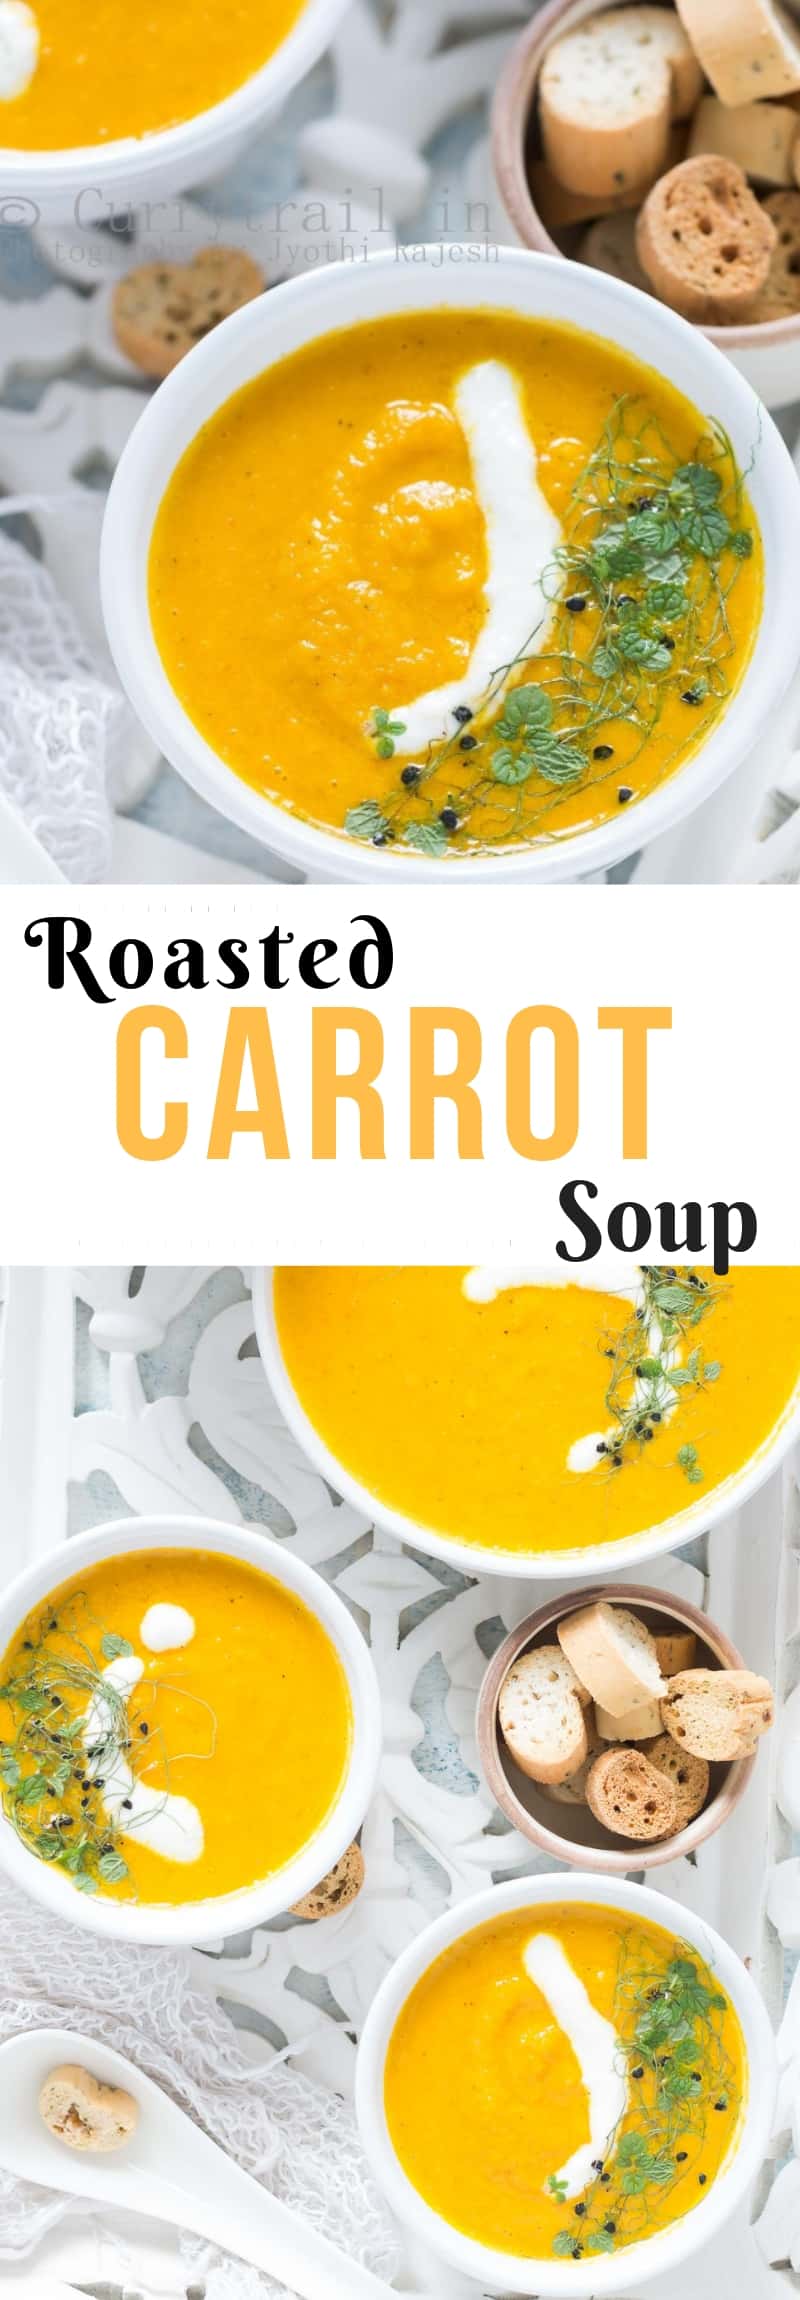 Roasted carrot soup with text overlay